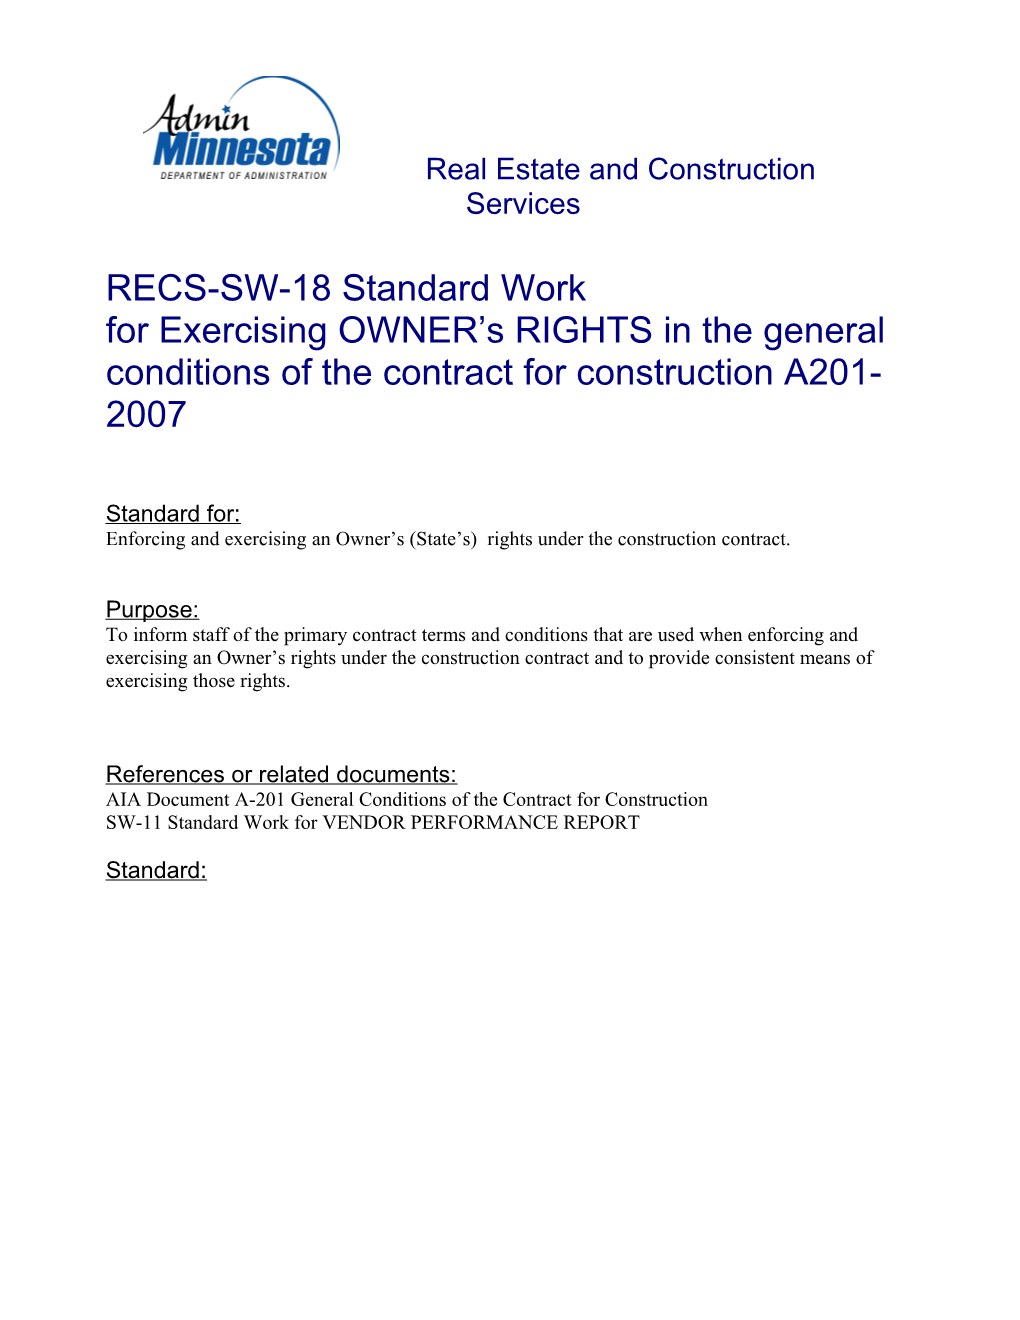 For Exercising OWNER S RIGHTS in the General Conditions of the Contract For